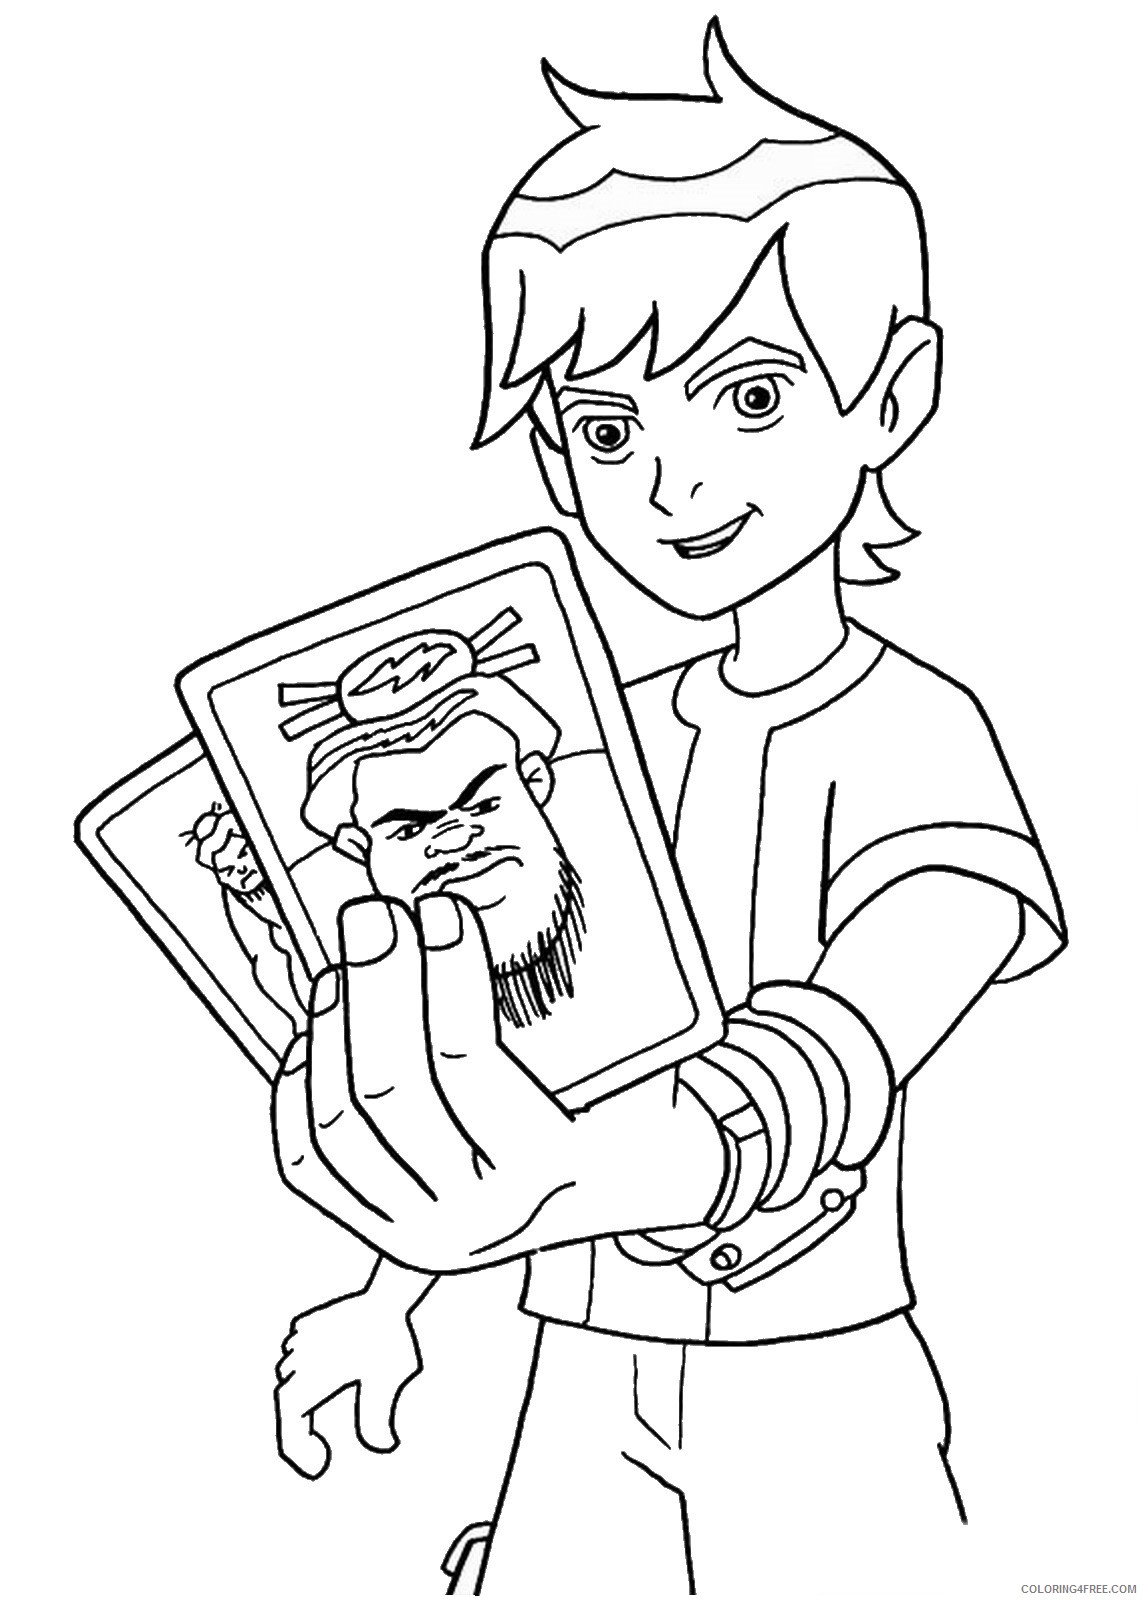 Ben 10 Coloring Pages Cartoons 1542163377_ben10 34 Printable 2020 1211 Coloring4free